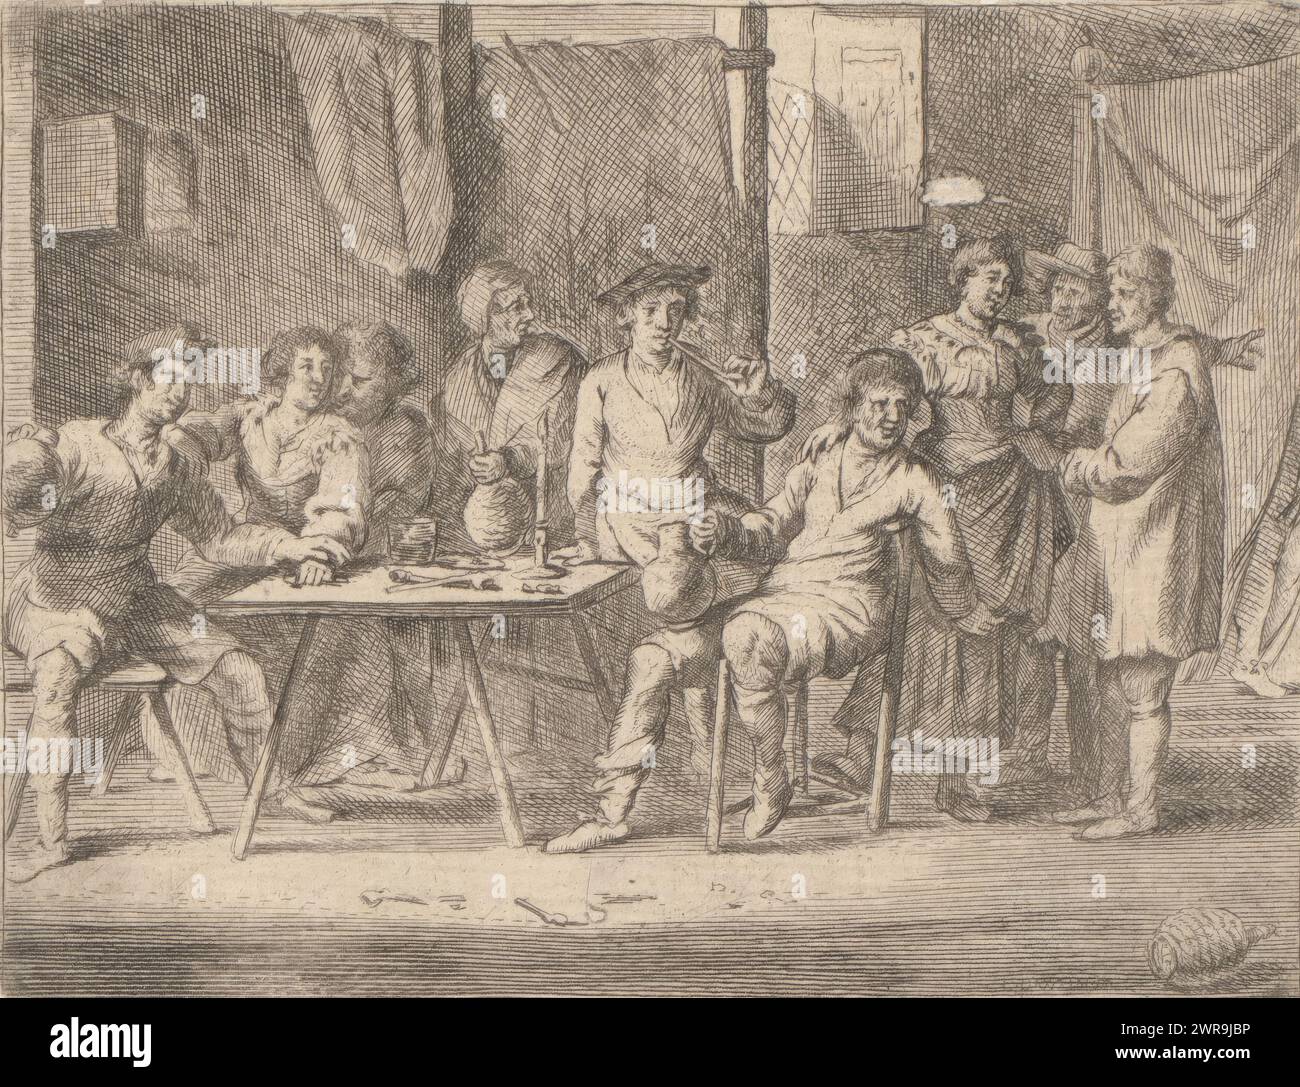 Company in an inn, Genre scenes (series title), Interior of an inn with men and women smoking and drinking. The innkeeper puts a jug of drink on the table. In the right background are two men talking to a woman. One of them points to a curtain from behind which a leg appears., print maker: anonymous, after design by: Cornelis de Wael, Italy, 1630 - 1698, paper, etching, engraving, height 116 mm × width 150 mm, print Stock Photo